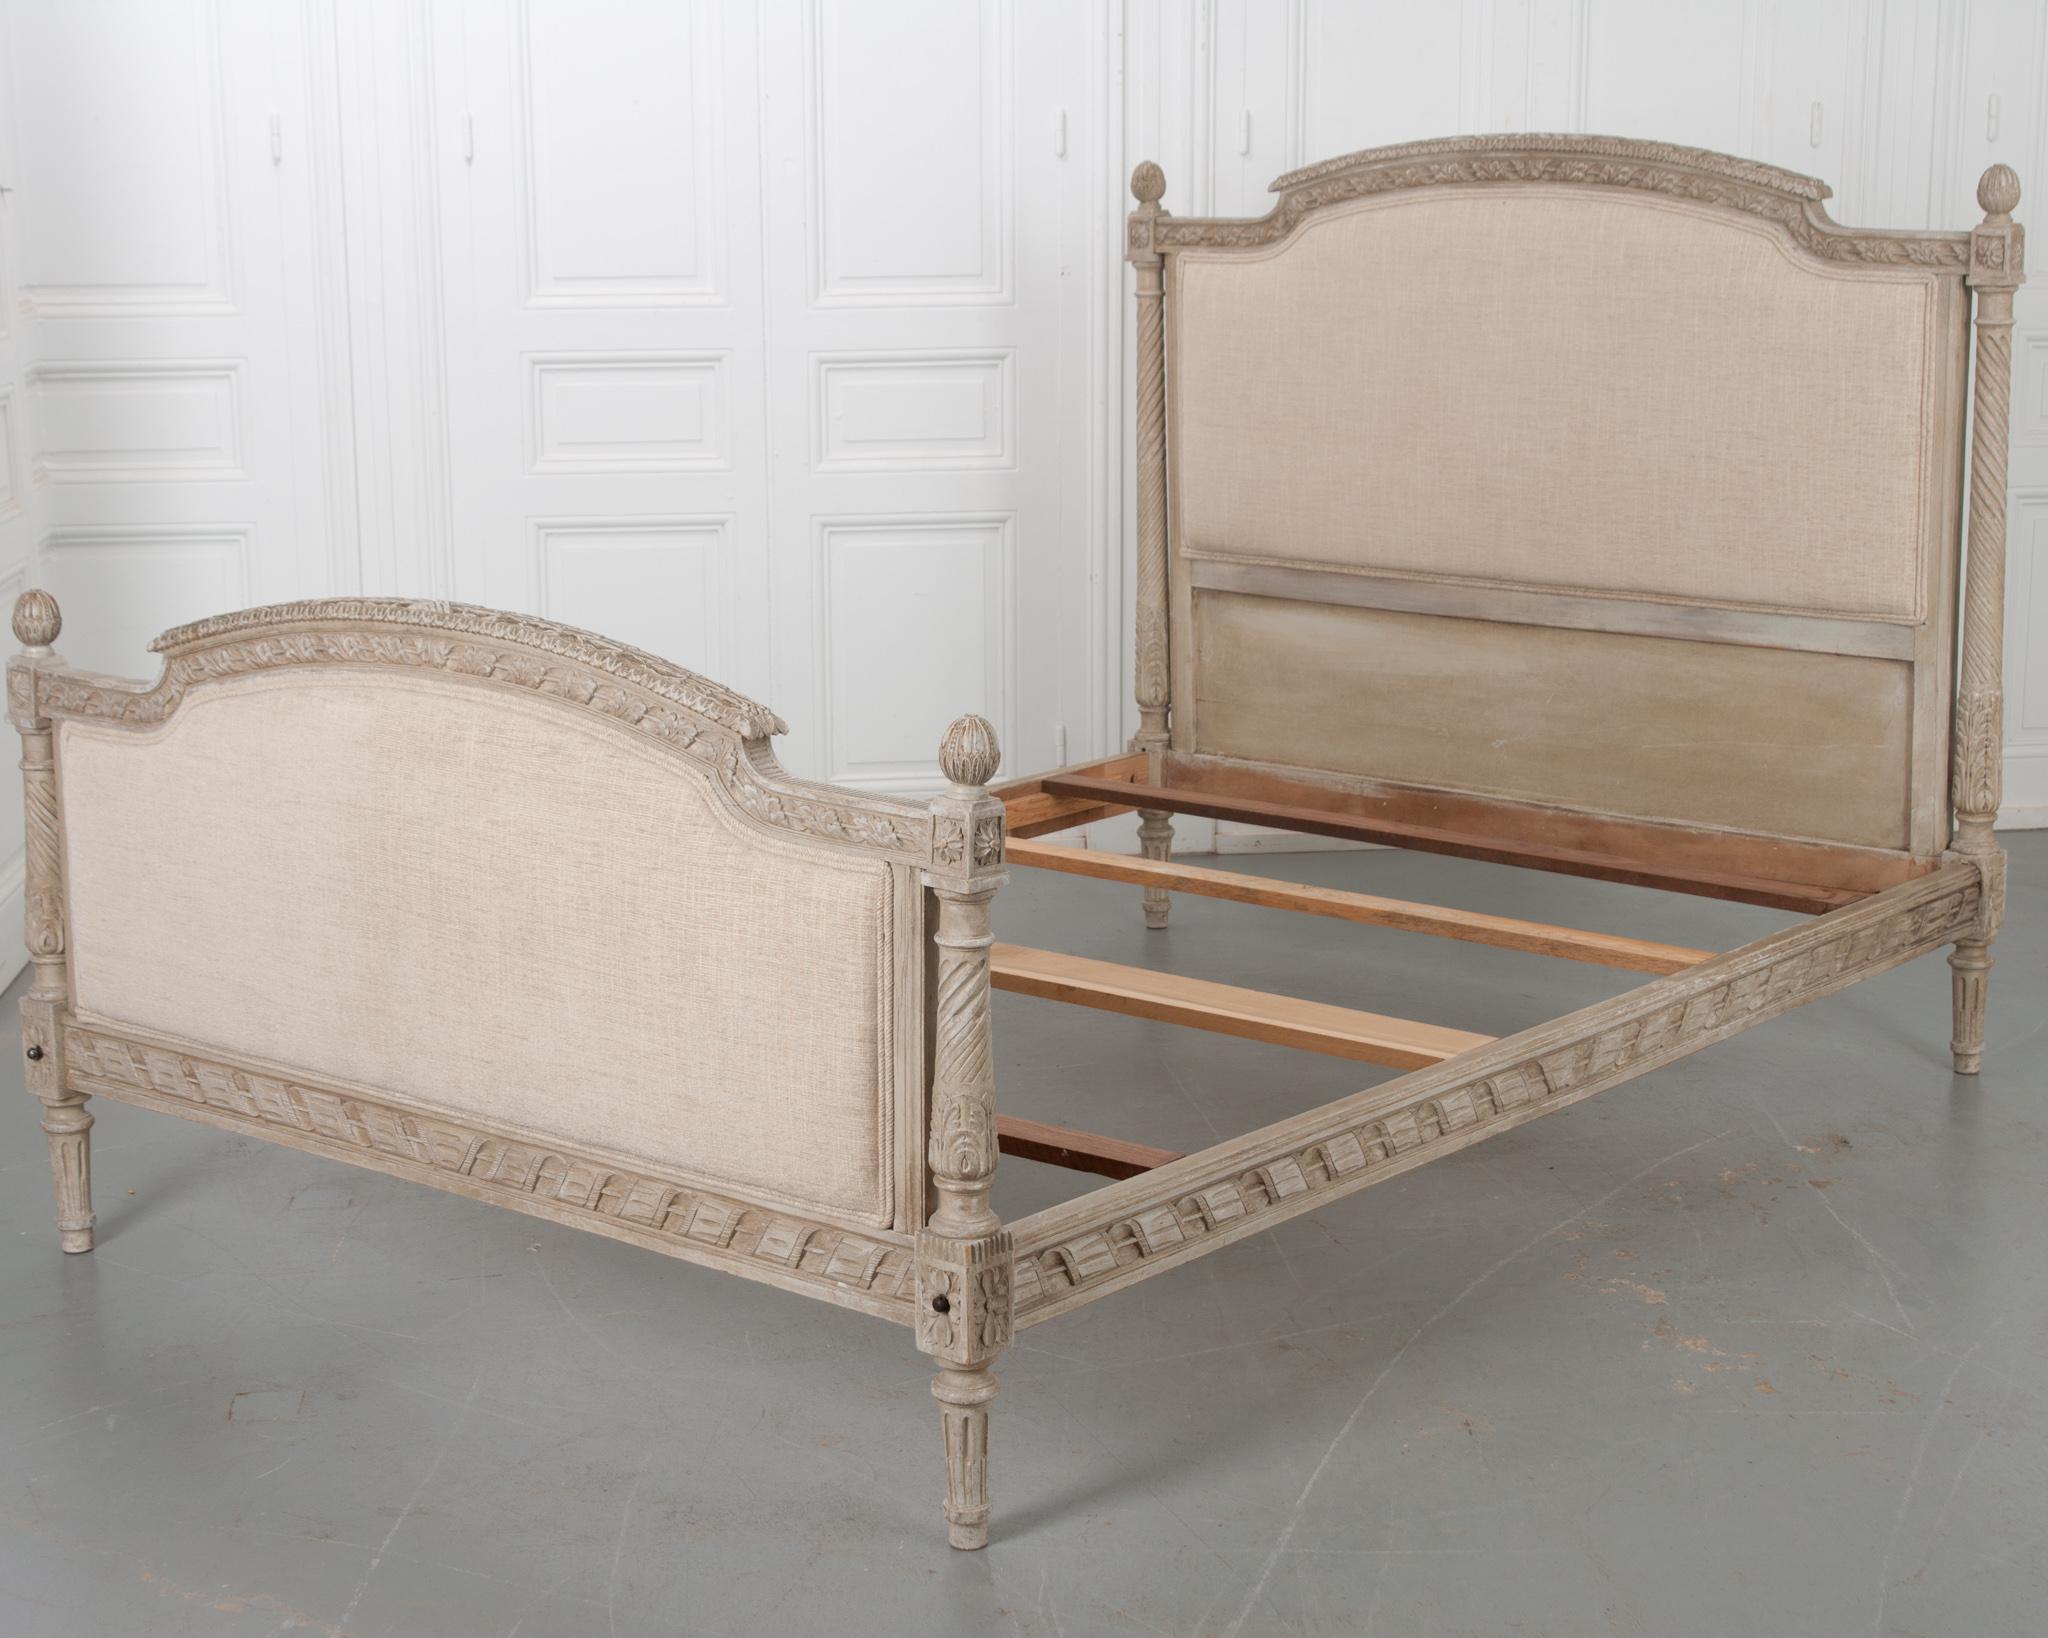 Painted a creamy gray color, this vintage bed is made in the French Louis XVI style and features many of the stylistic details of that period. Pomegranate finials cap the turned and twisted columns found at the bed’s four corners. These columns